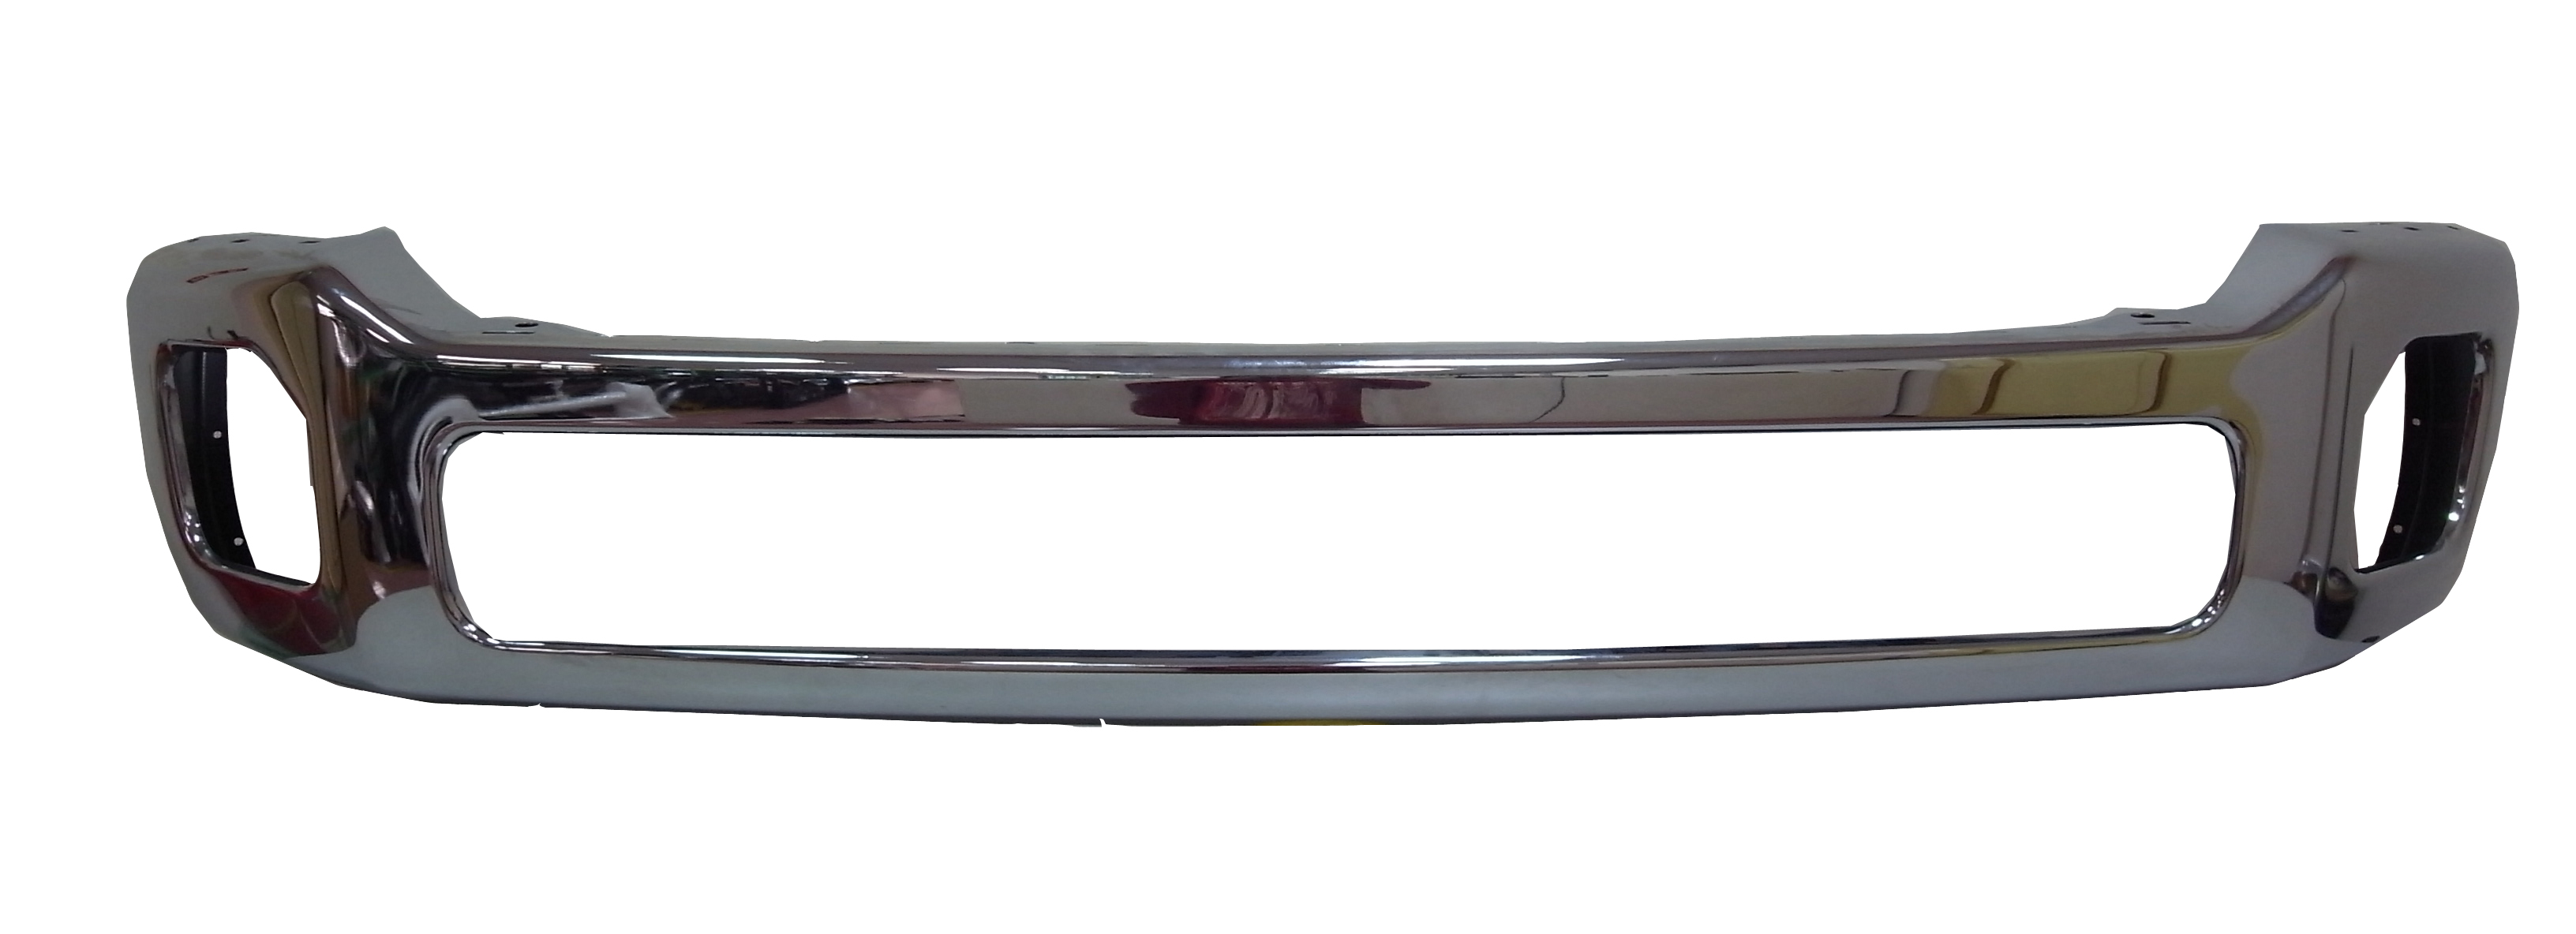 SUPER DUTY 11-16 Front Bumper Chrome With FLARE 450 With